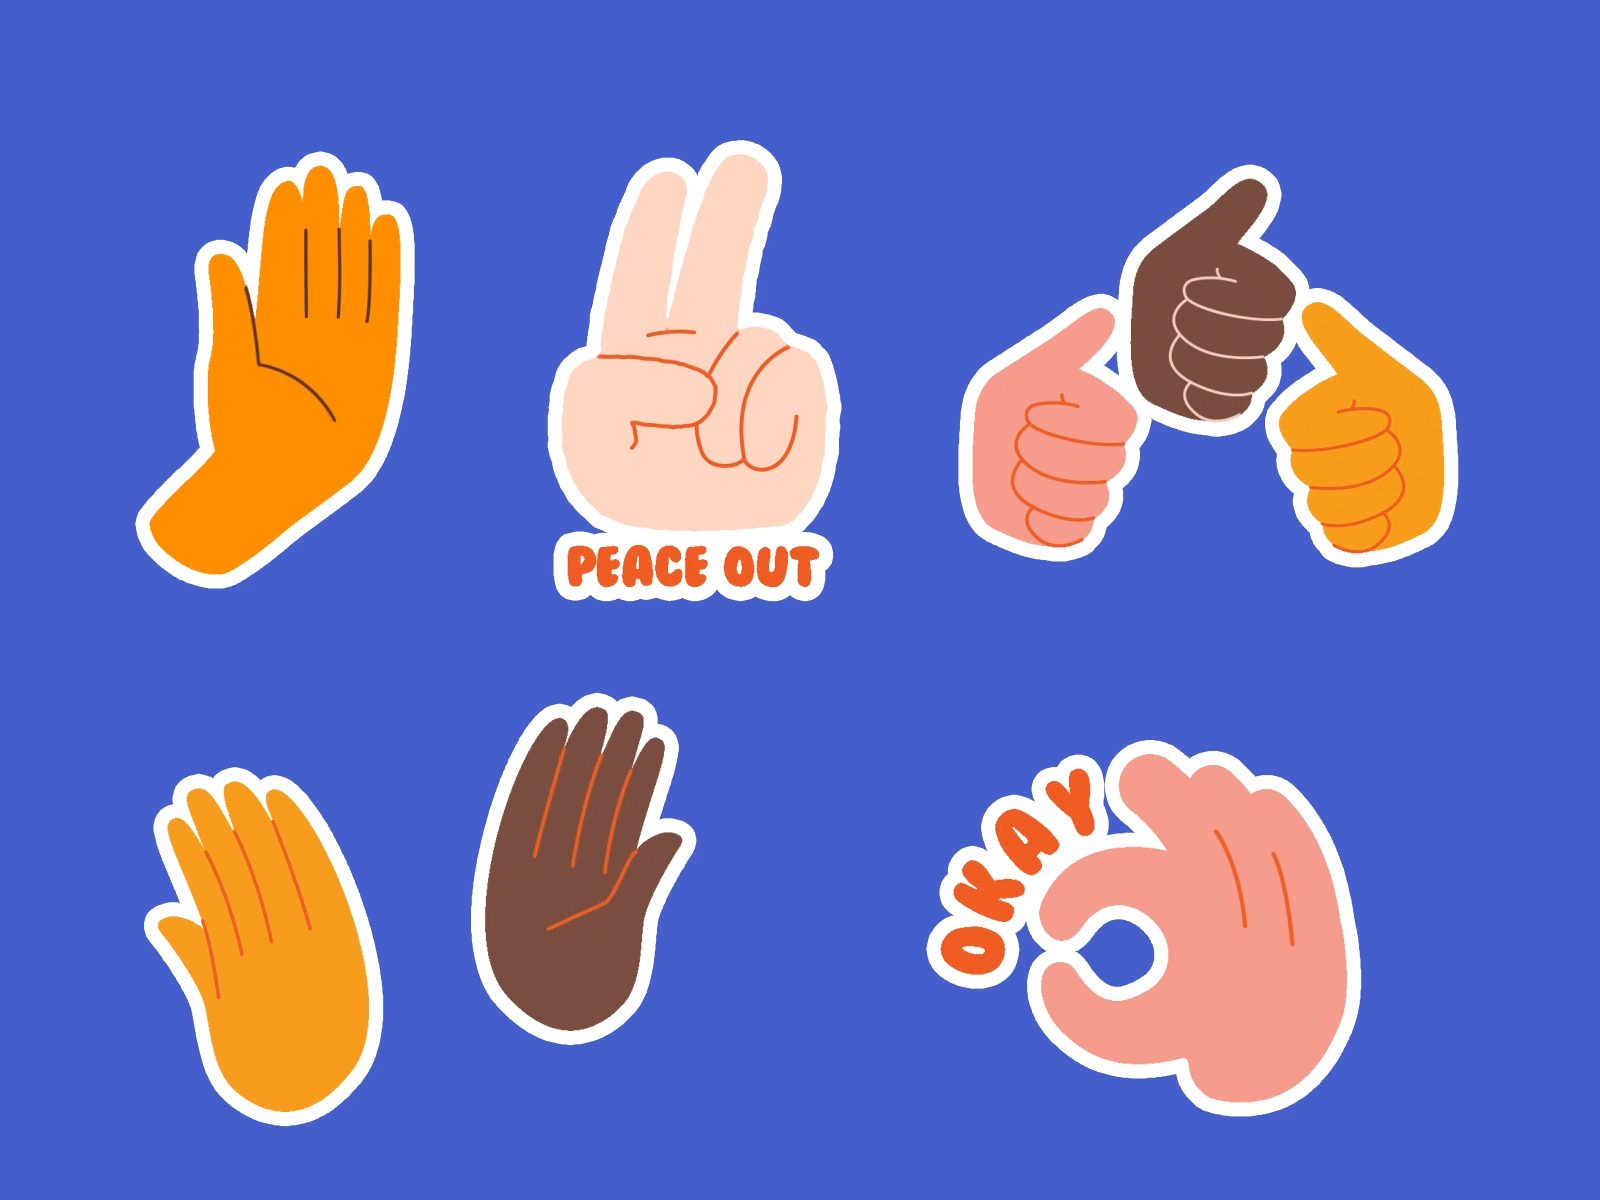 Animated Hand Gestures by Neri De Asis on Dribbble